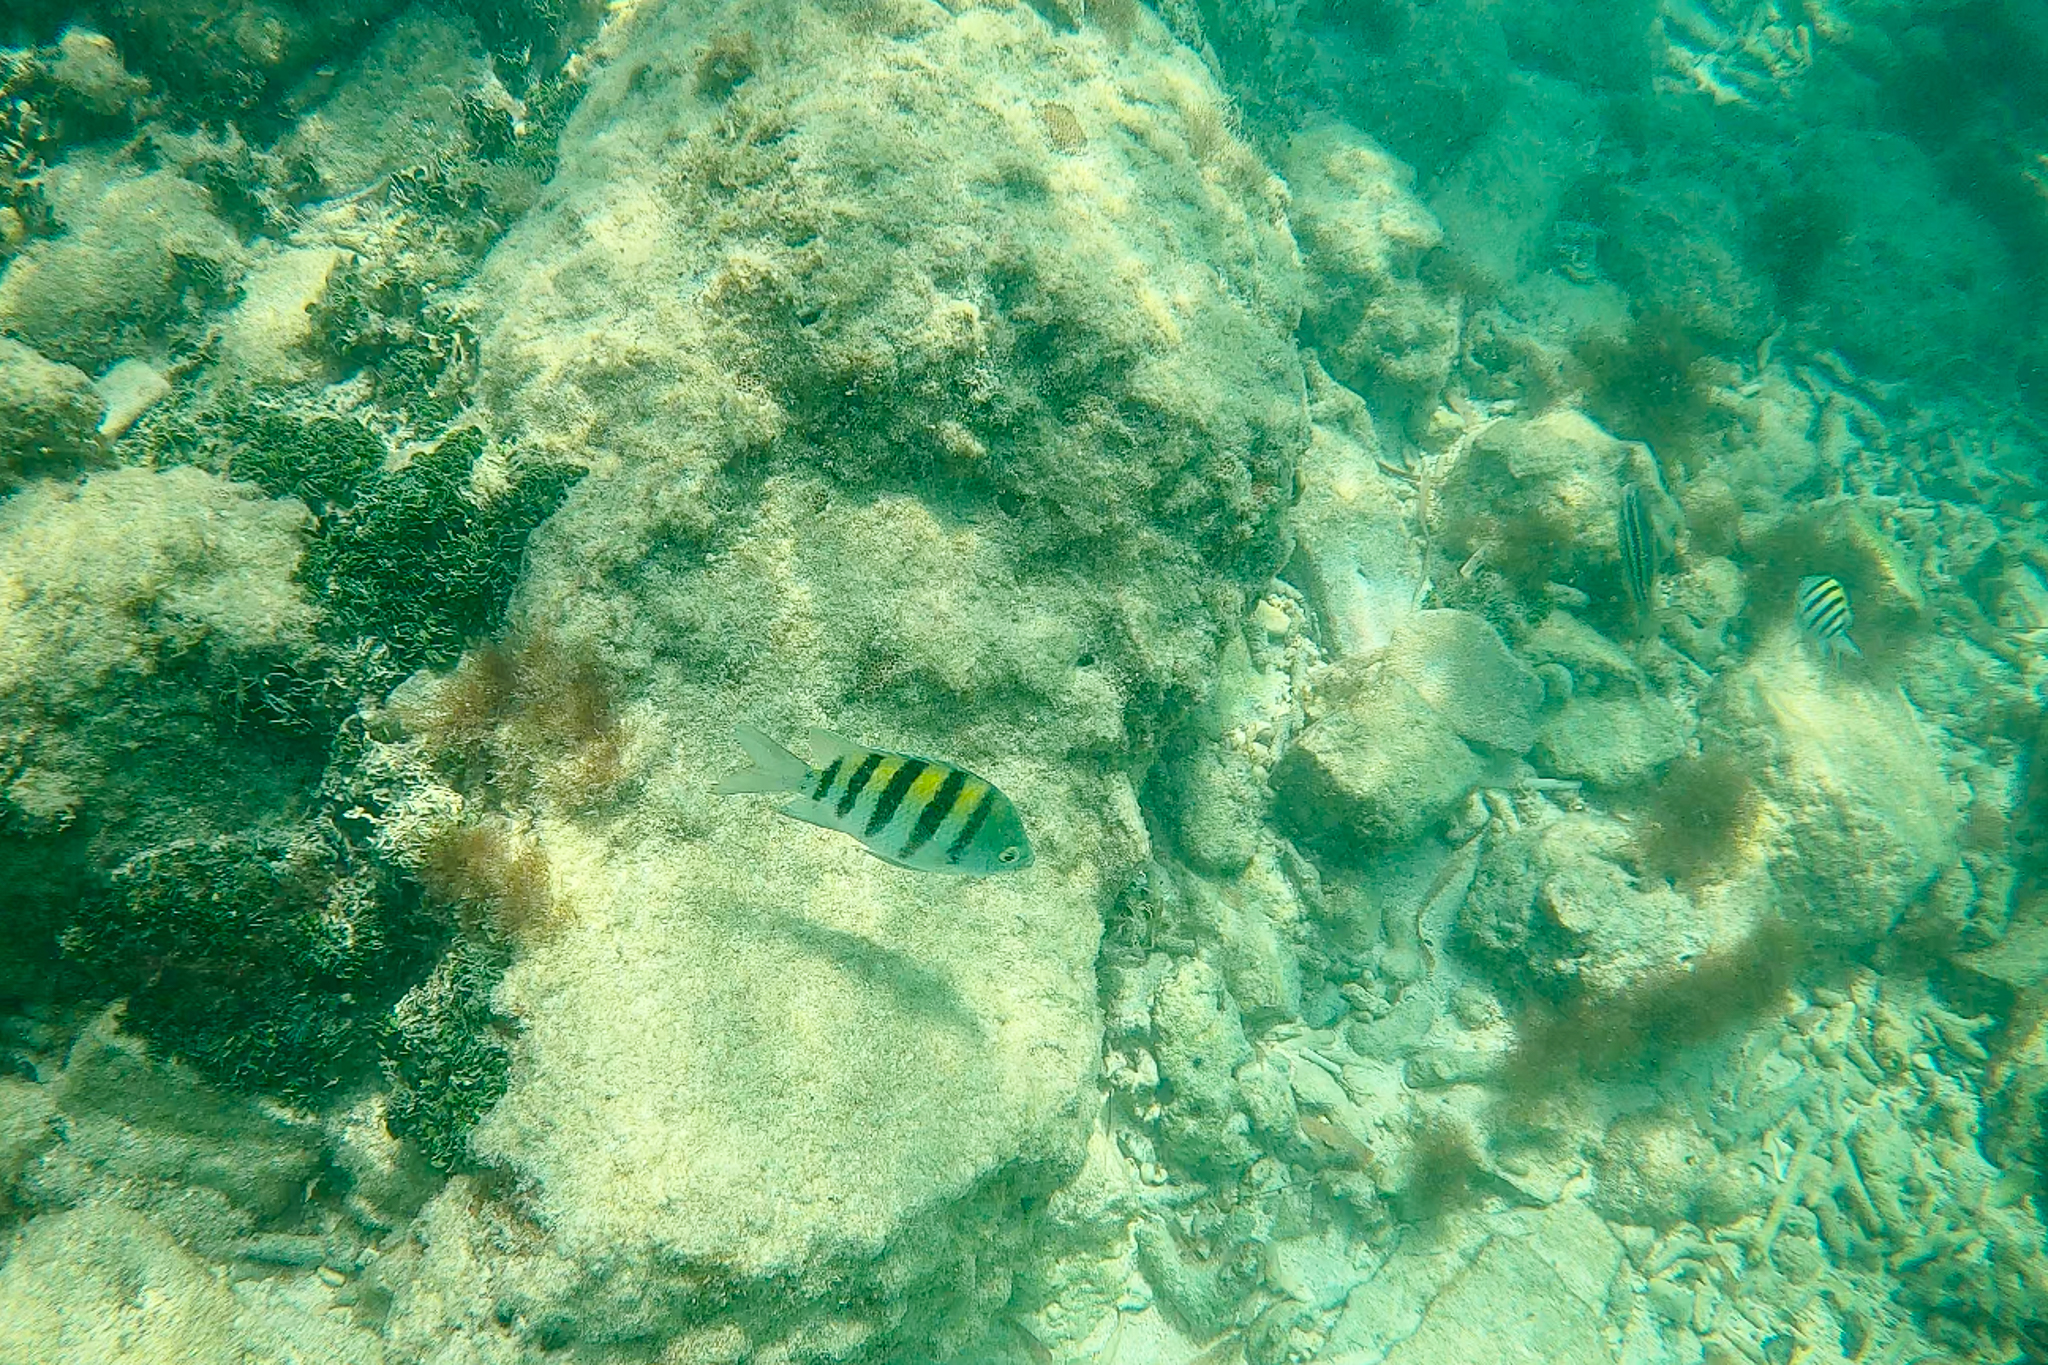 Black and yellow fish Dry Tortugas